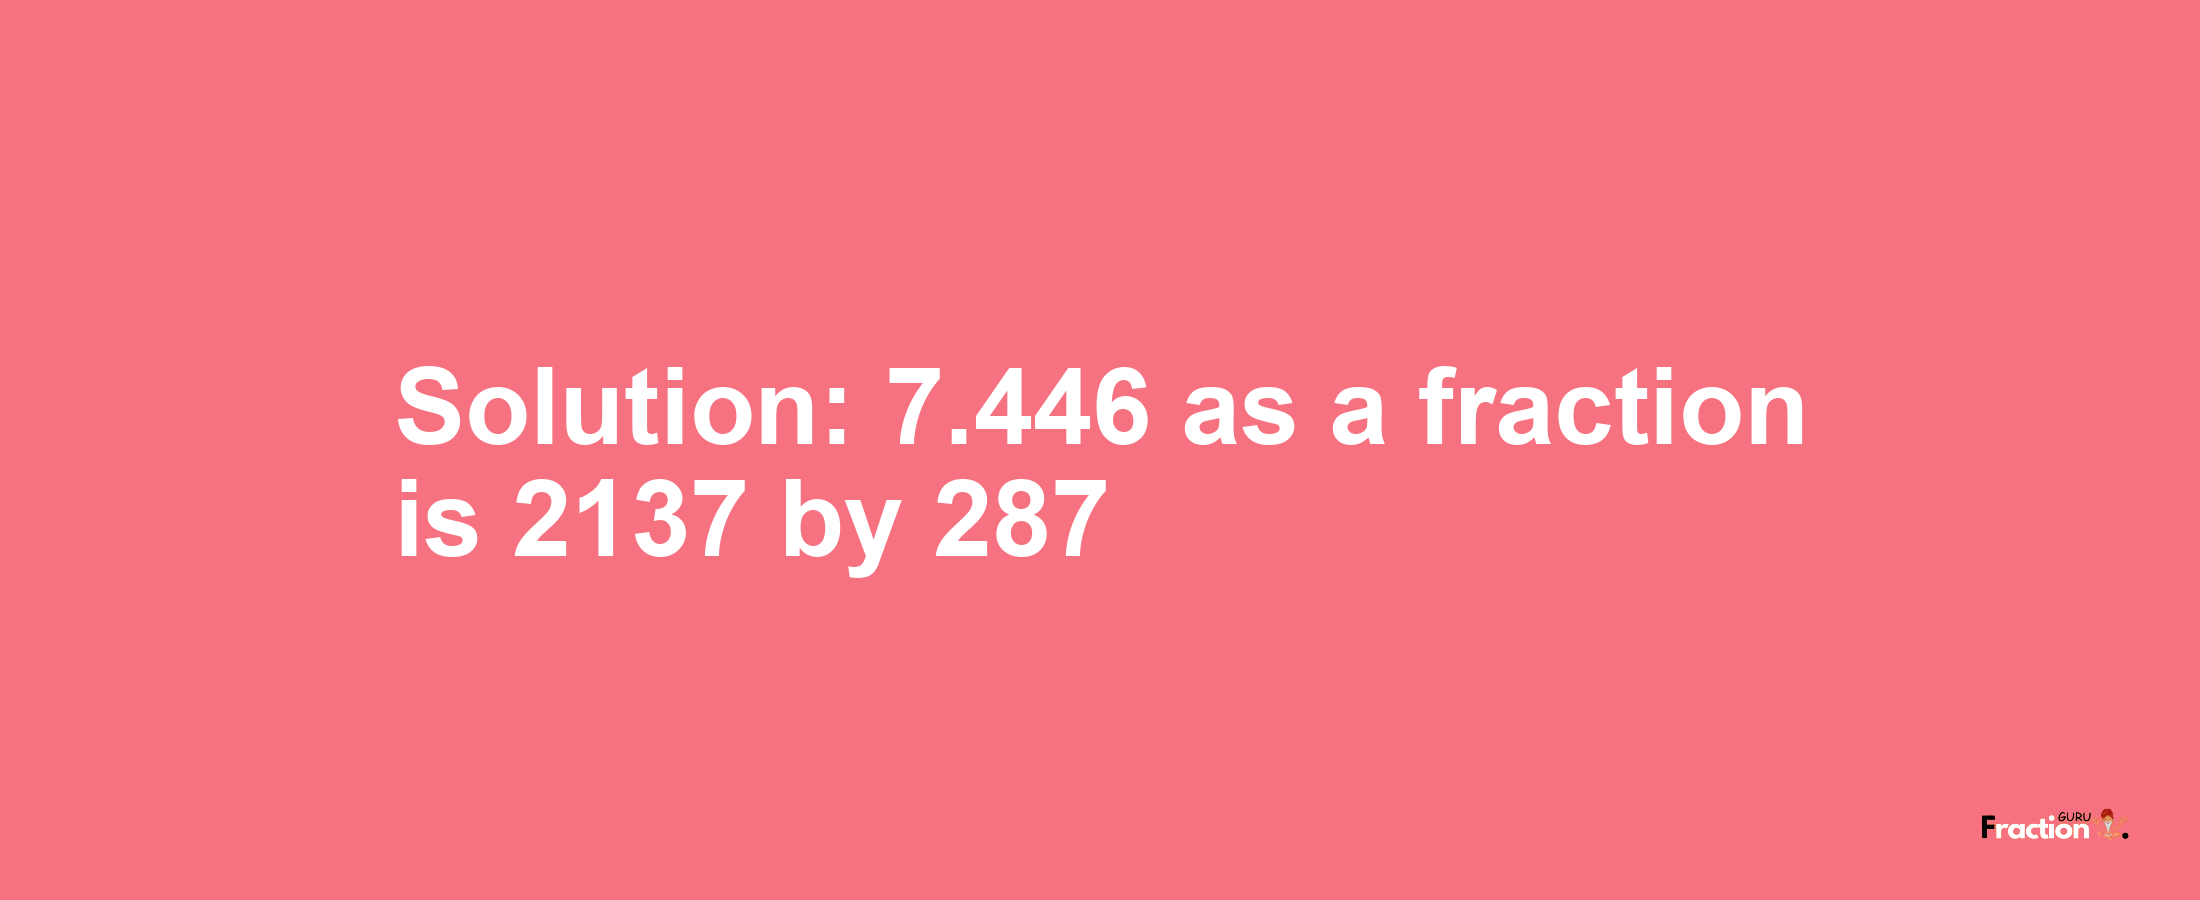 Solution:7.446 as a fraction is 2137/287